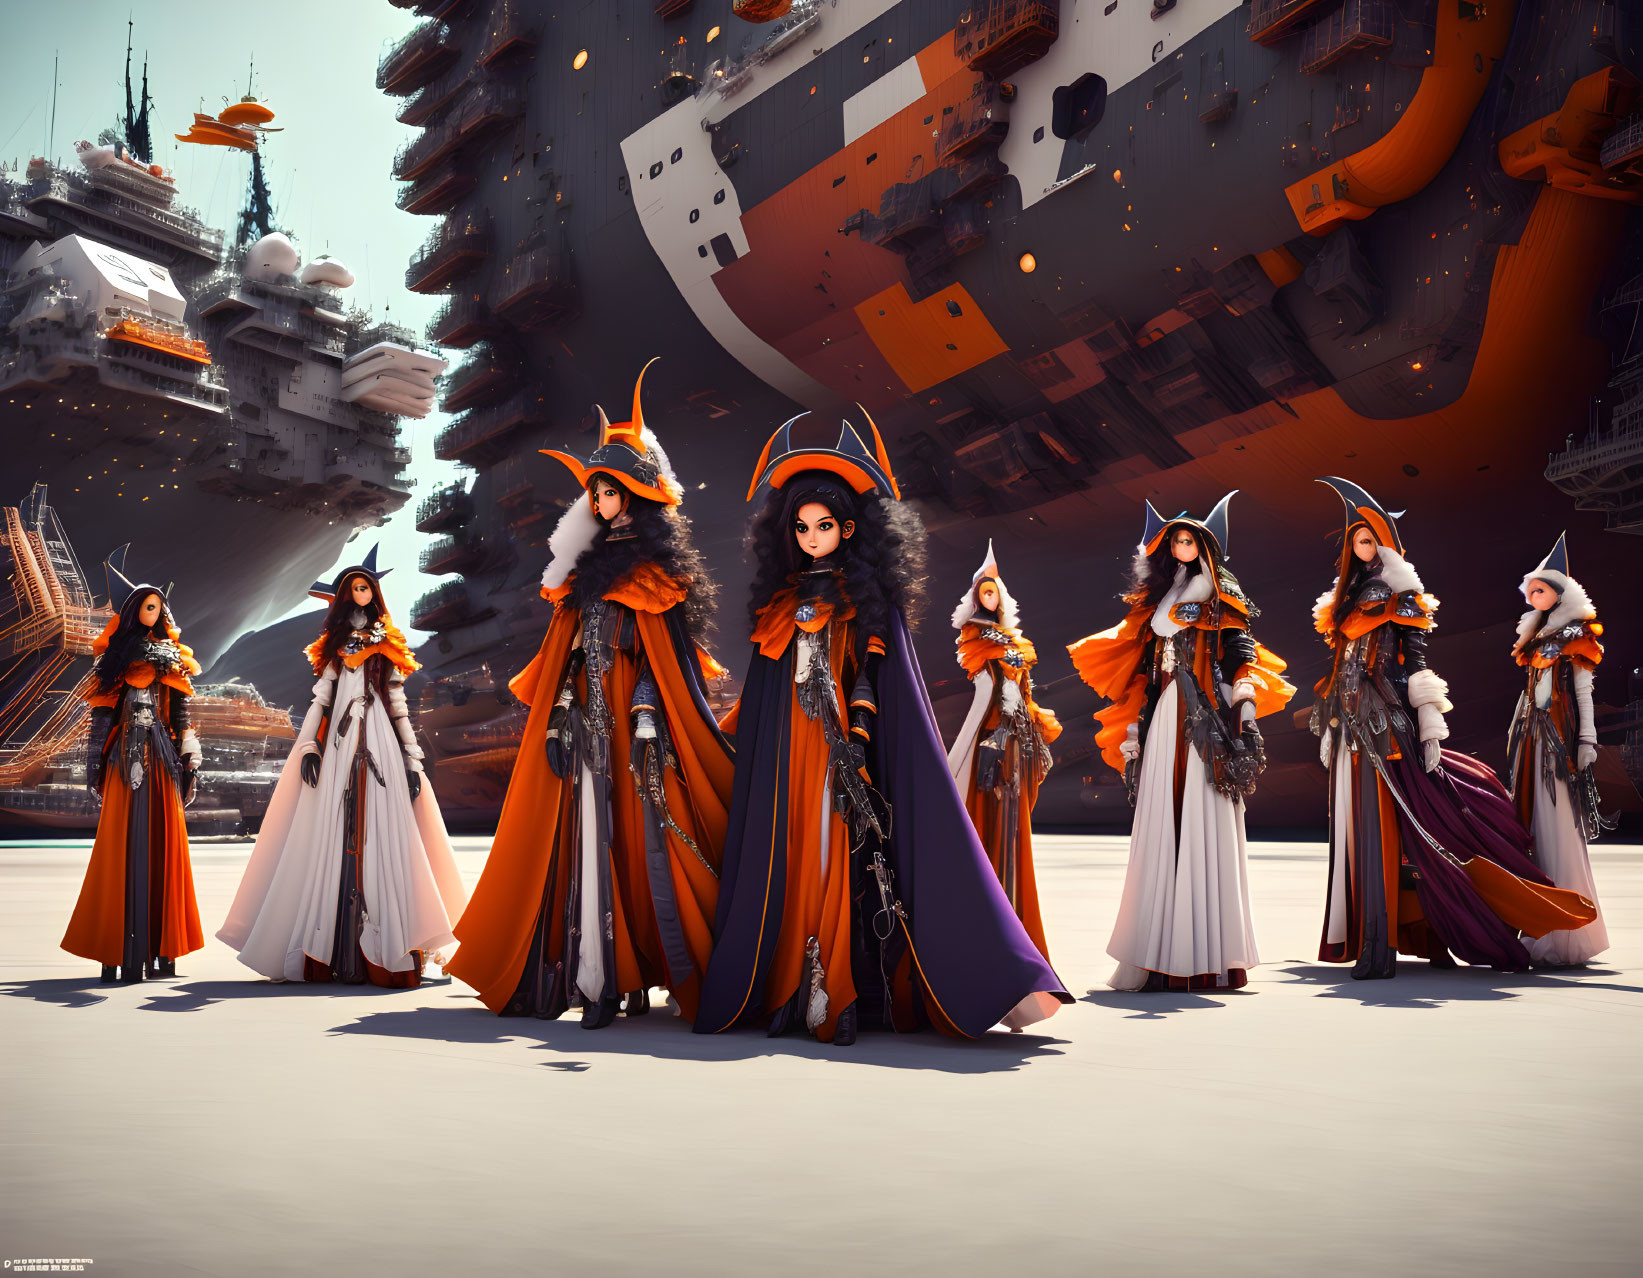 Seven stylized female characters in ornate sci-fi armor with fox-inspired helmets under a massive spaceship